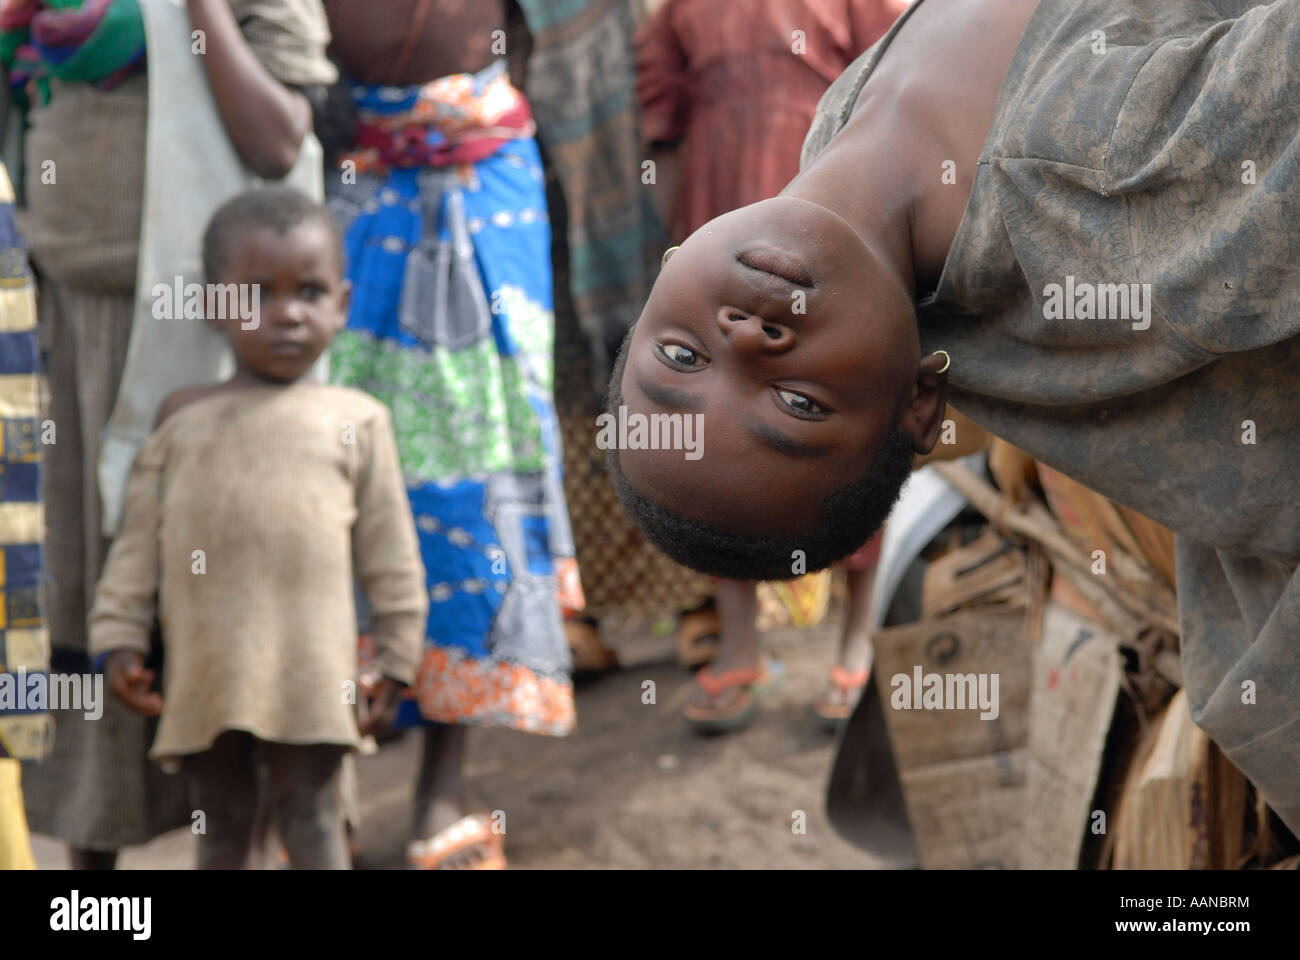 Internally displaced children in an IDP makeshift camp in North Kivu, DR Congo Africa Stock Photo